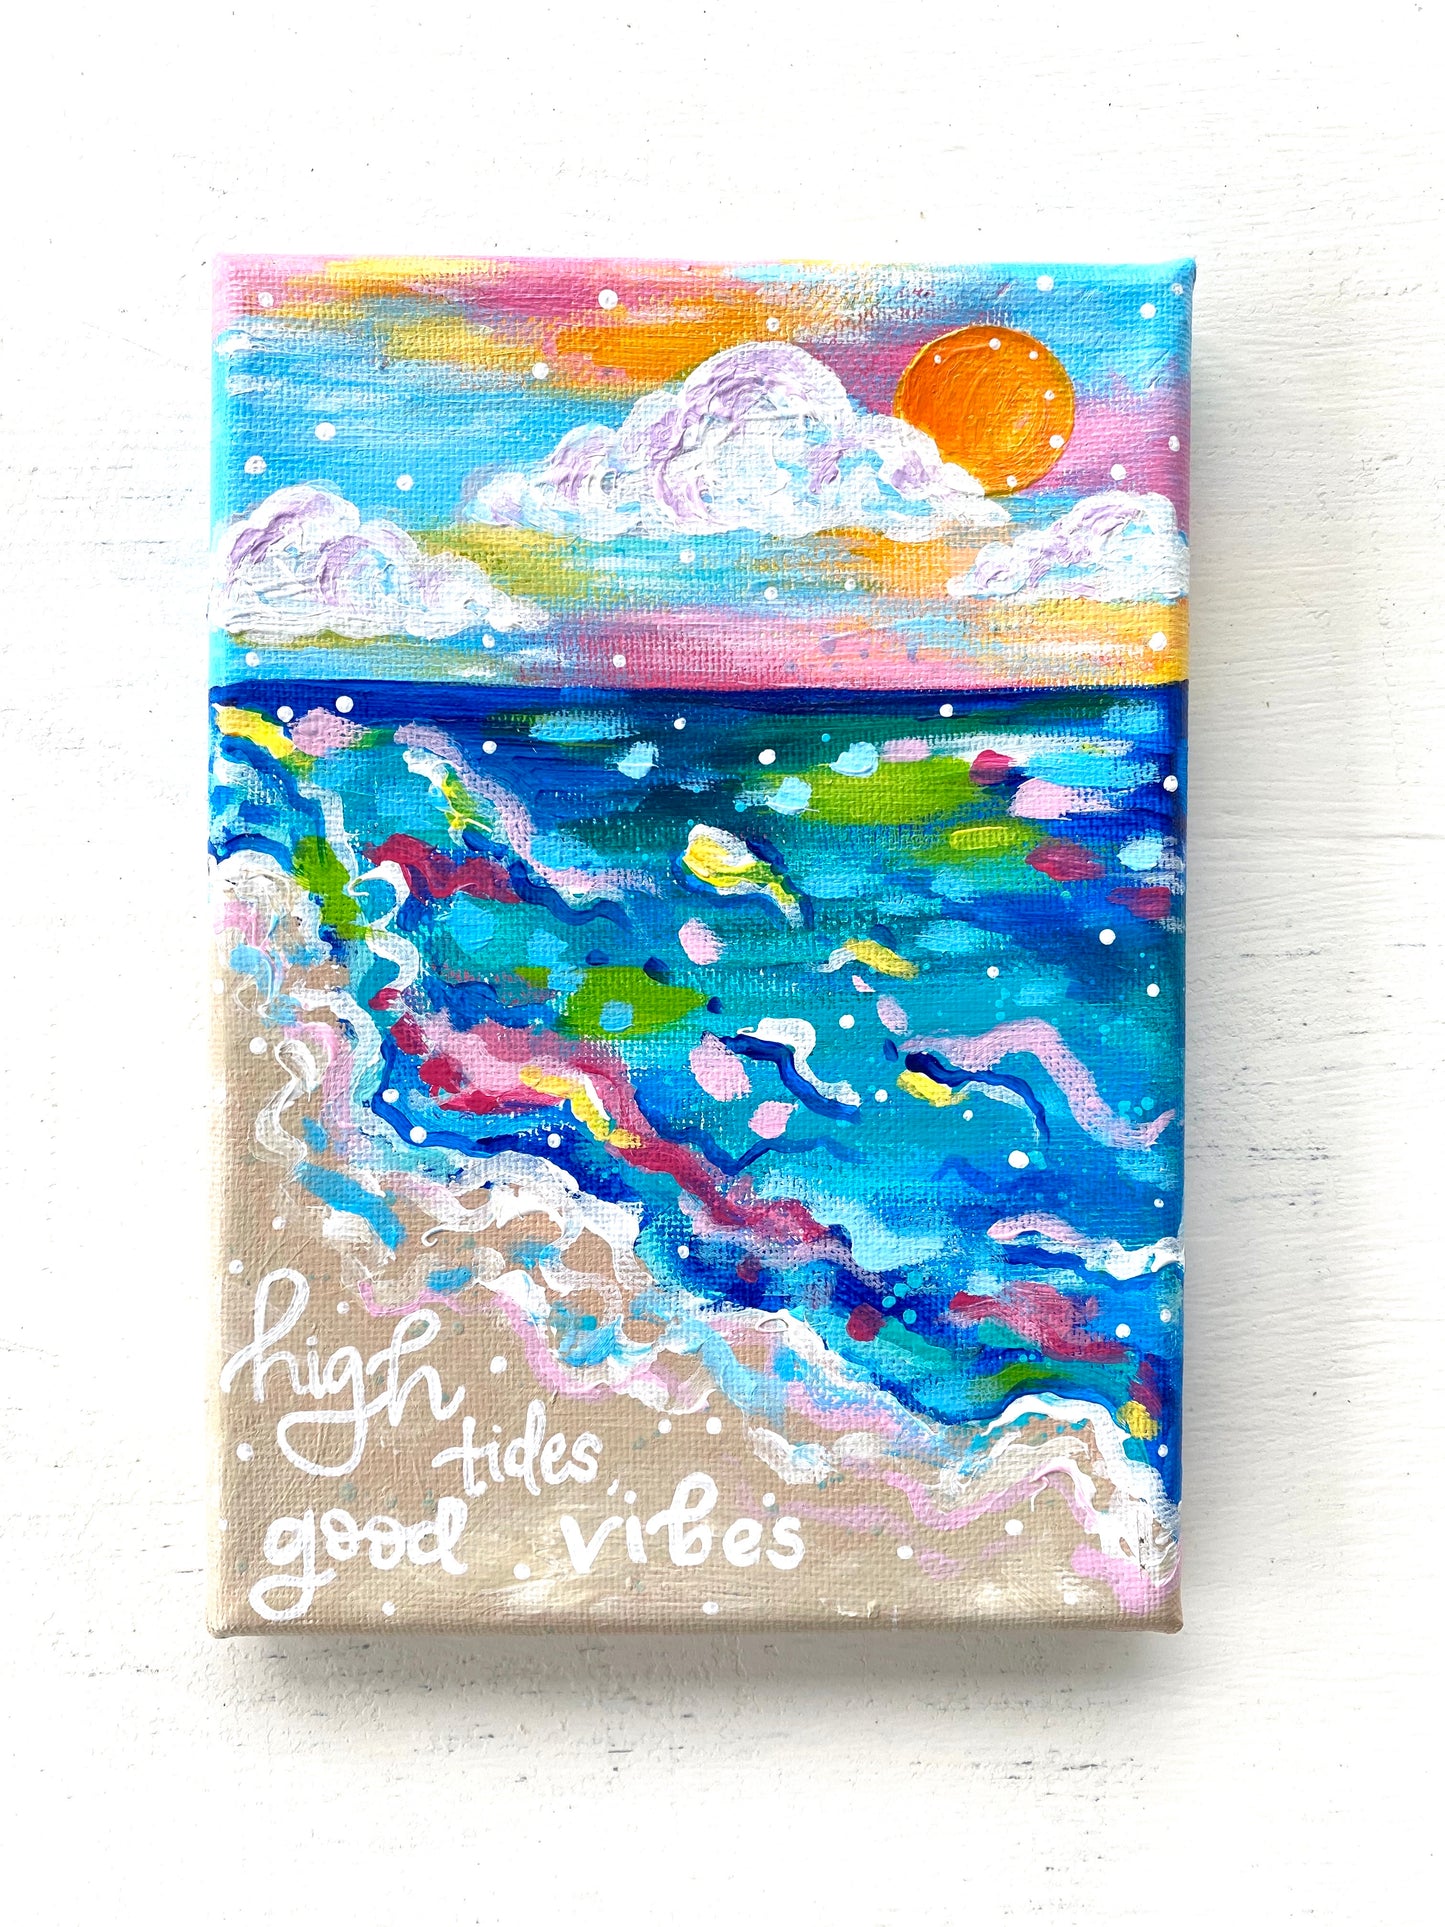 “High Tides, Good Vibes” 5x7 inch Original Coastal Inspired Painting on Canvas with painted sides